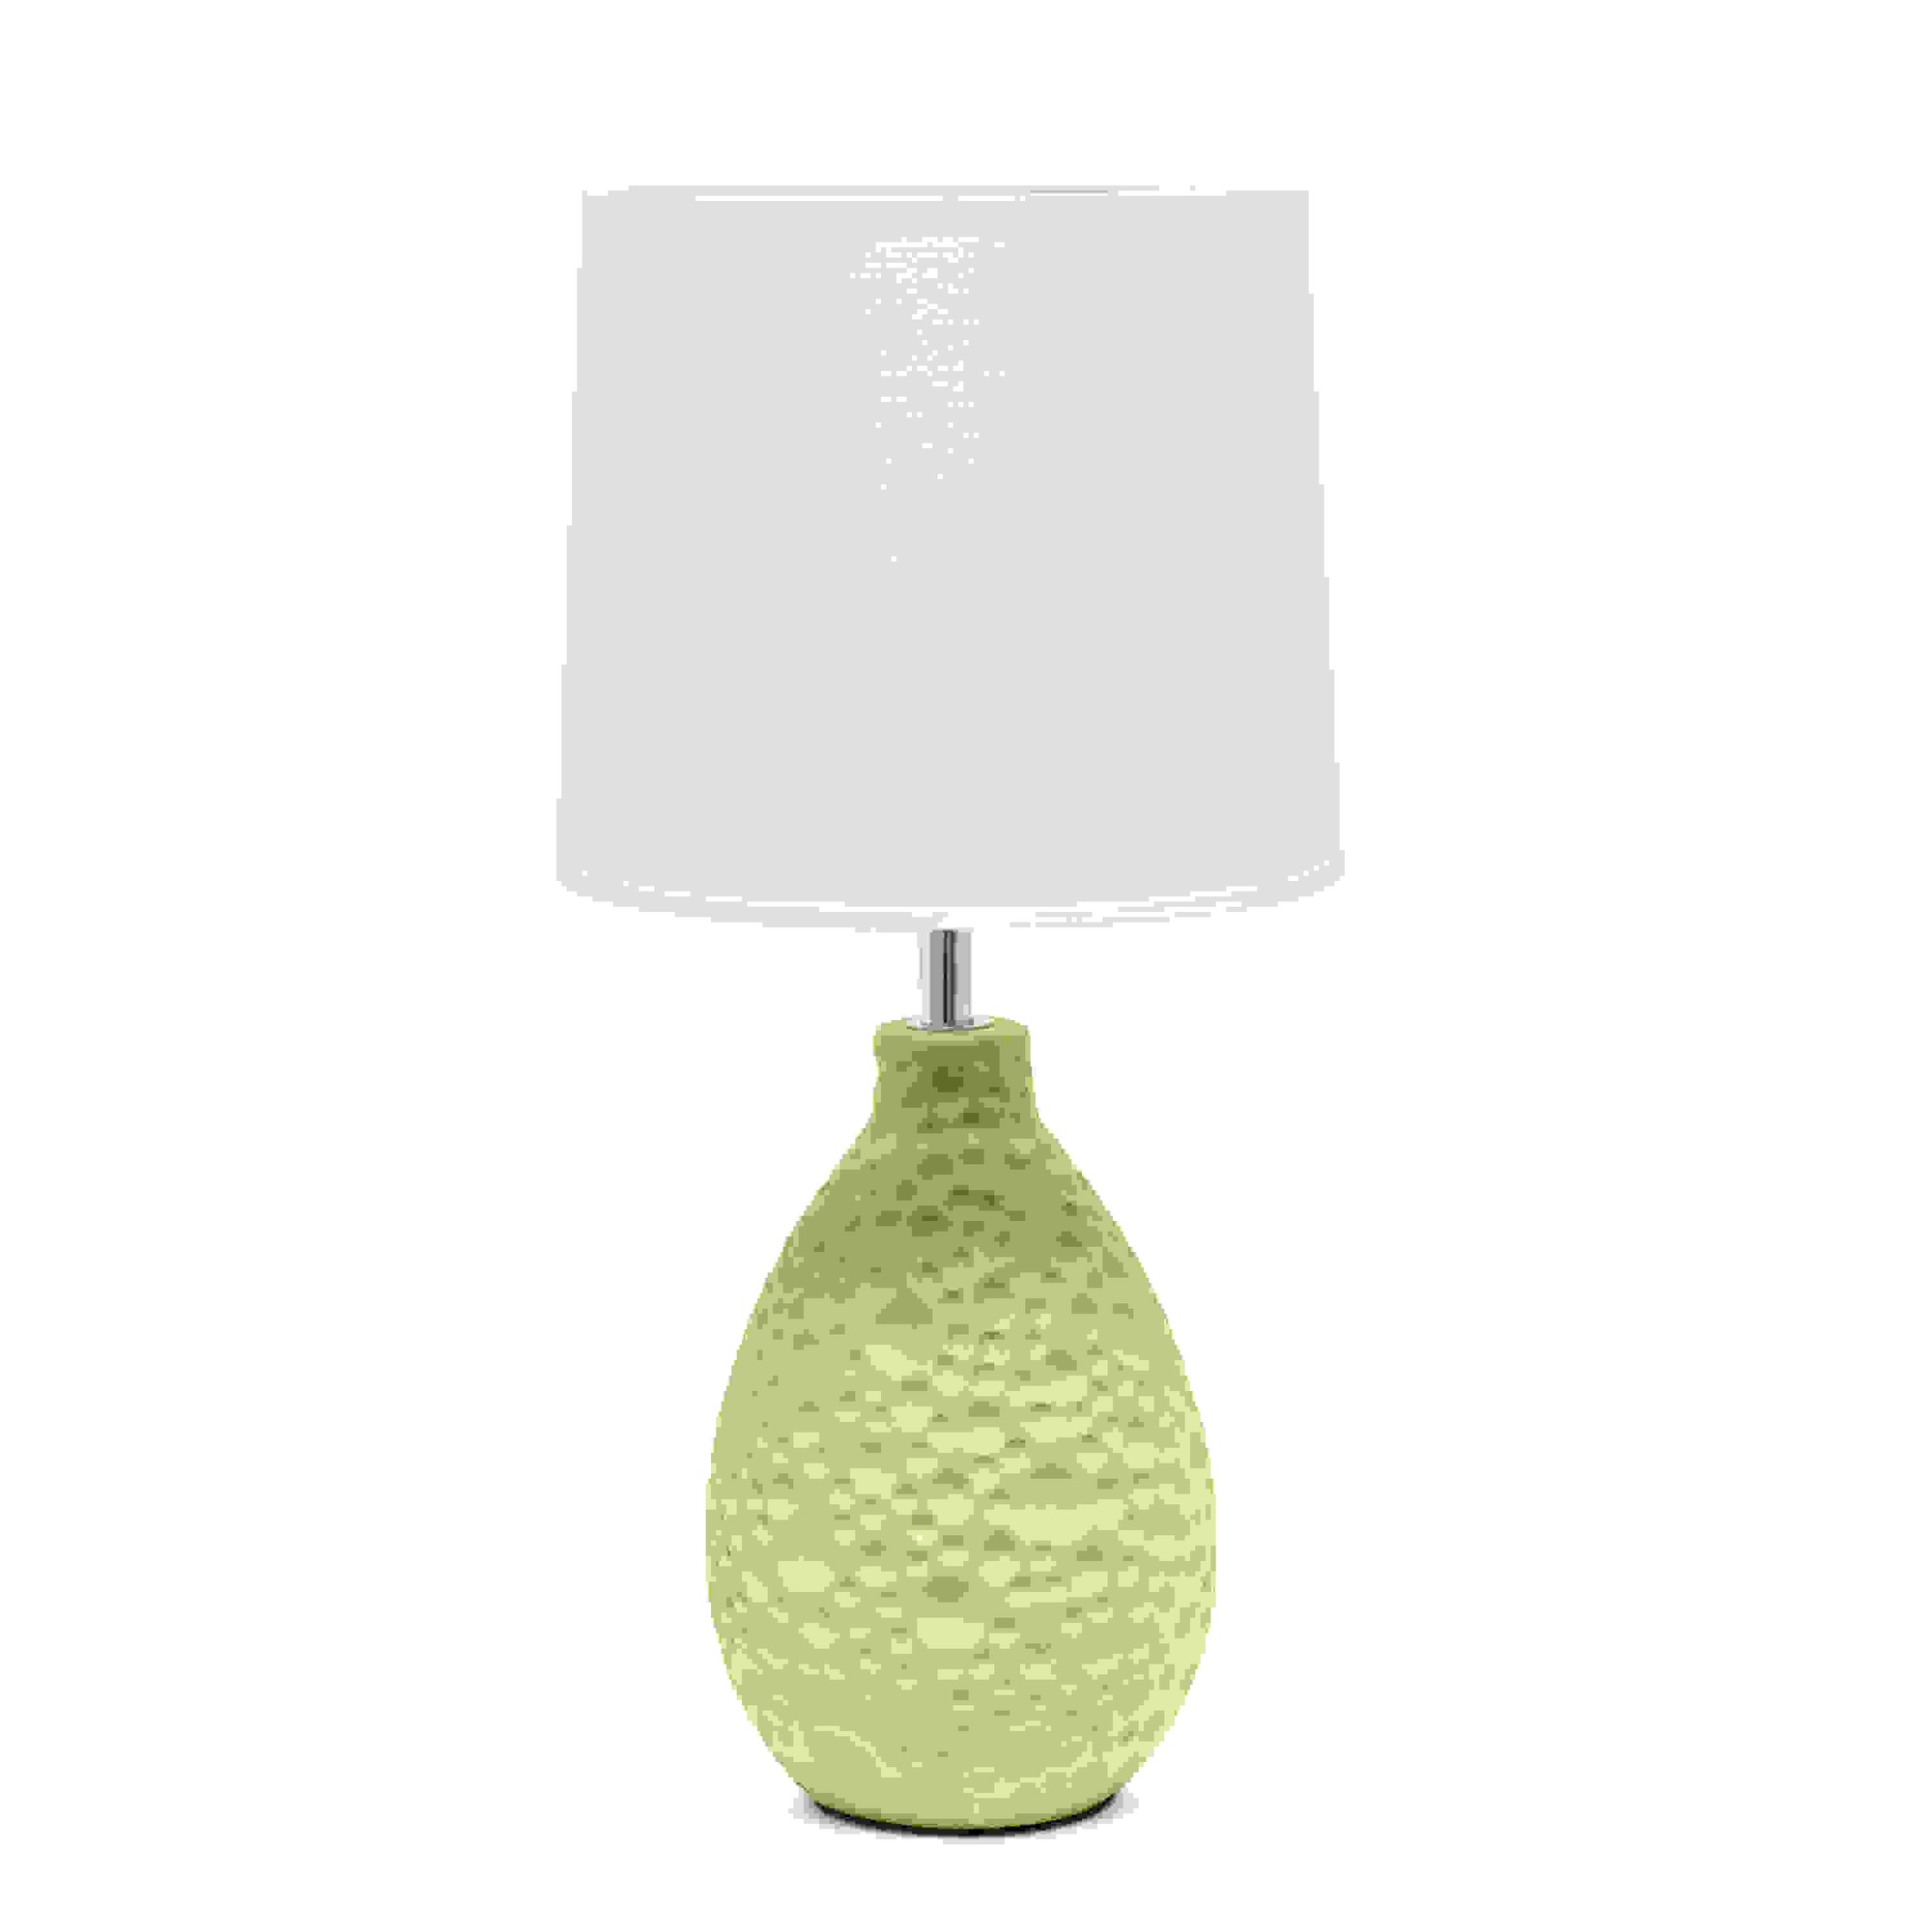 Simple Designs Green Texturized Ceramic Oval Table Lamp